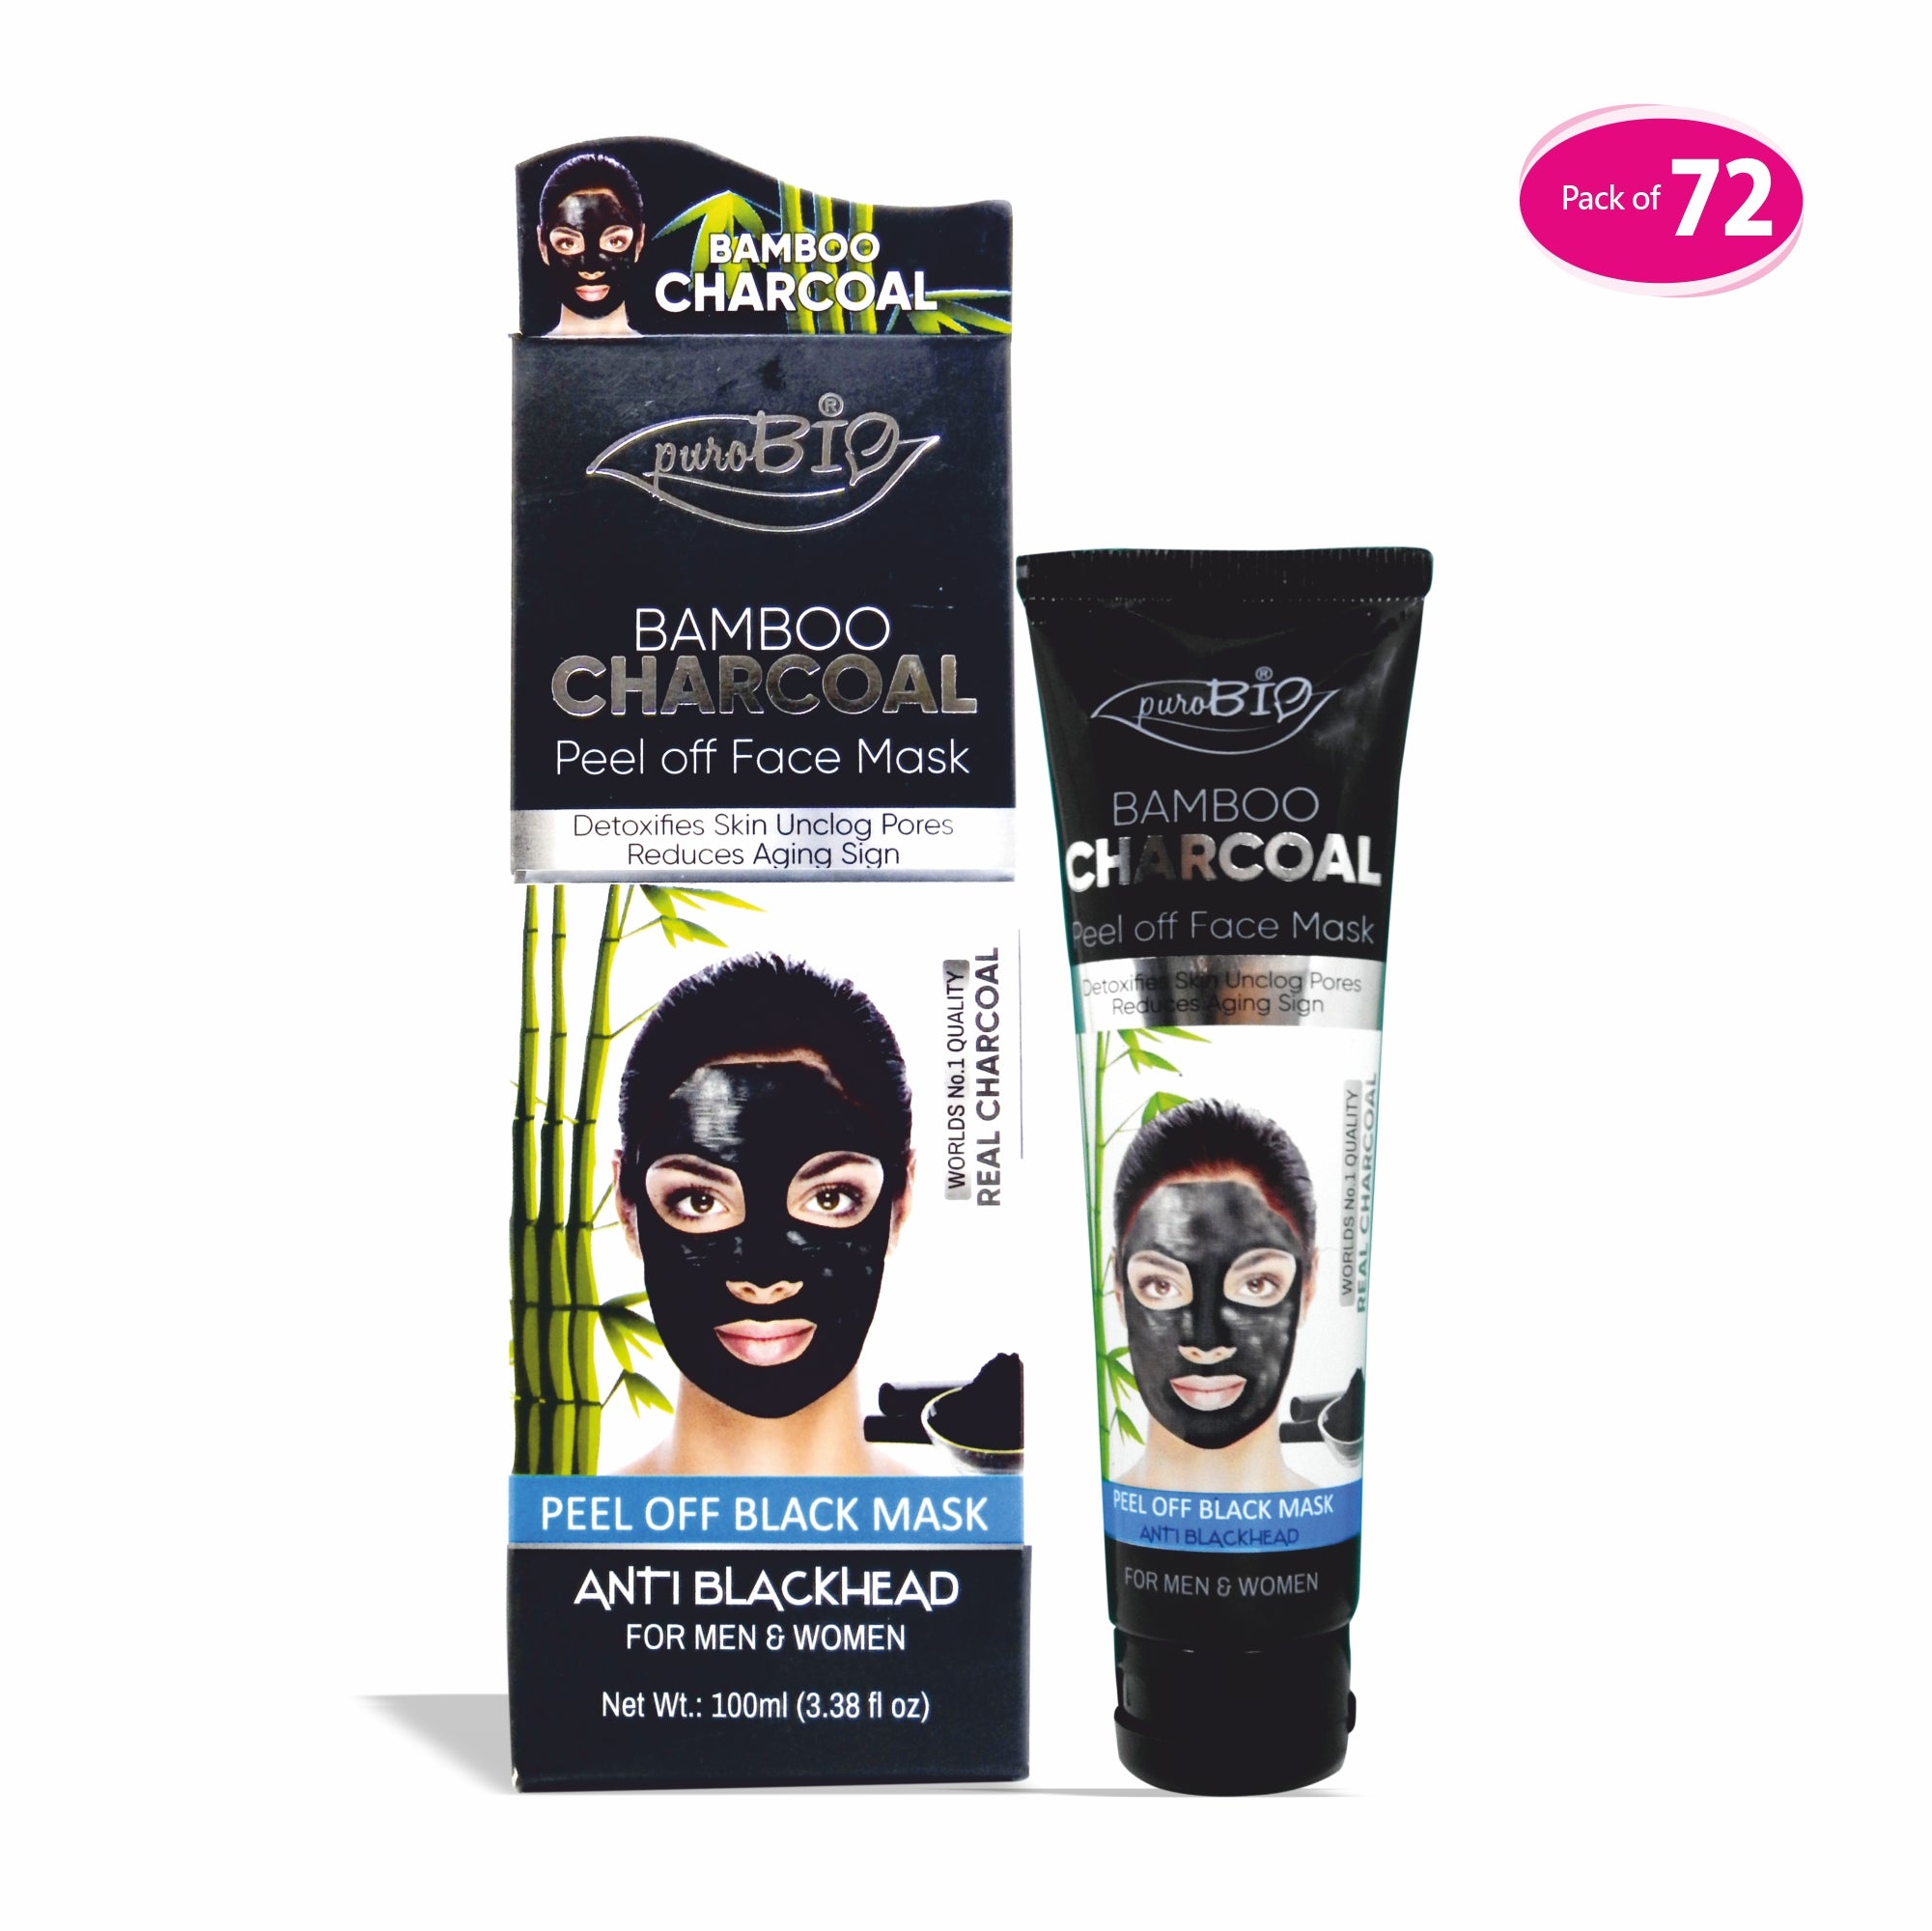 Bamboo Charcoal Peel Off Face Mask in bulk 72 quantity